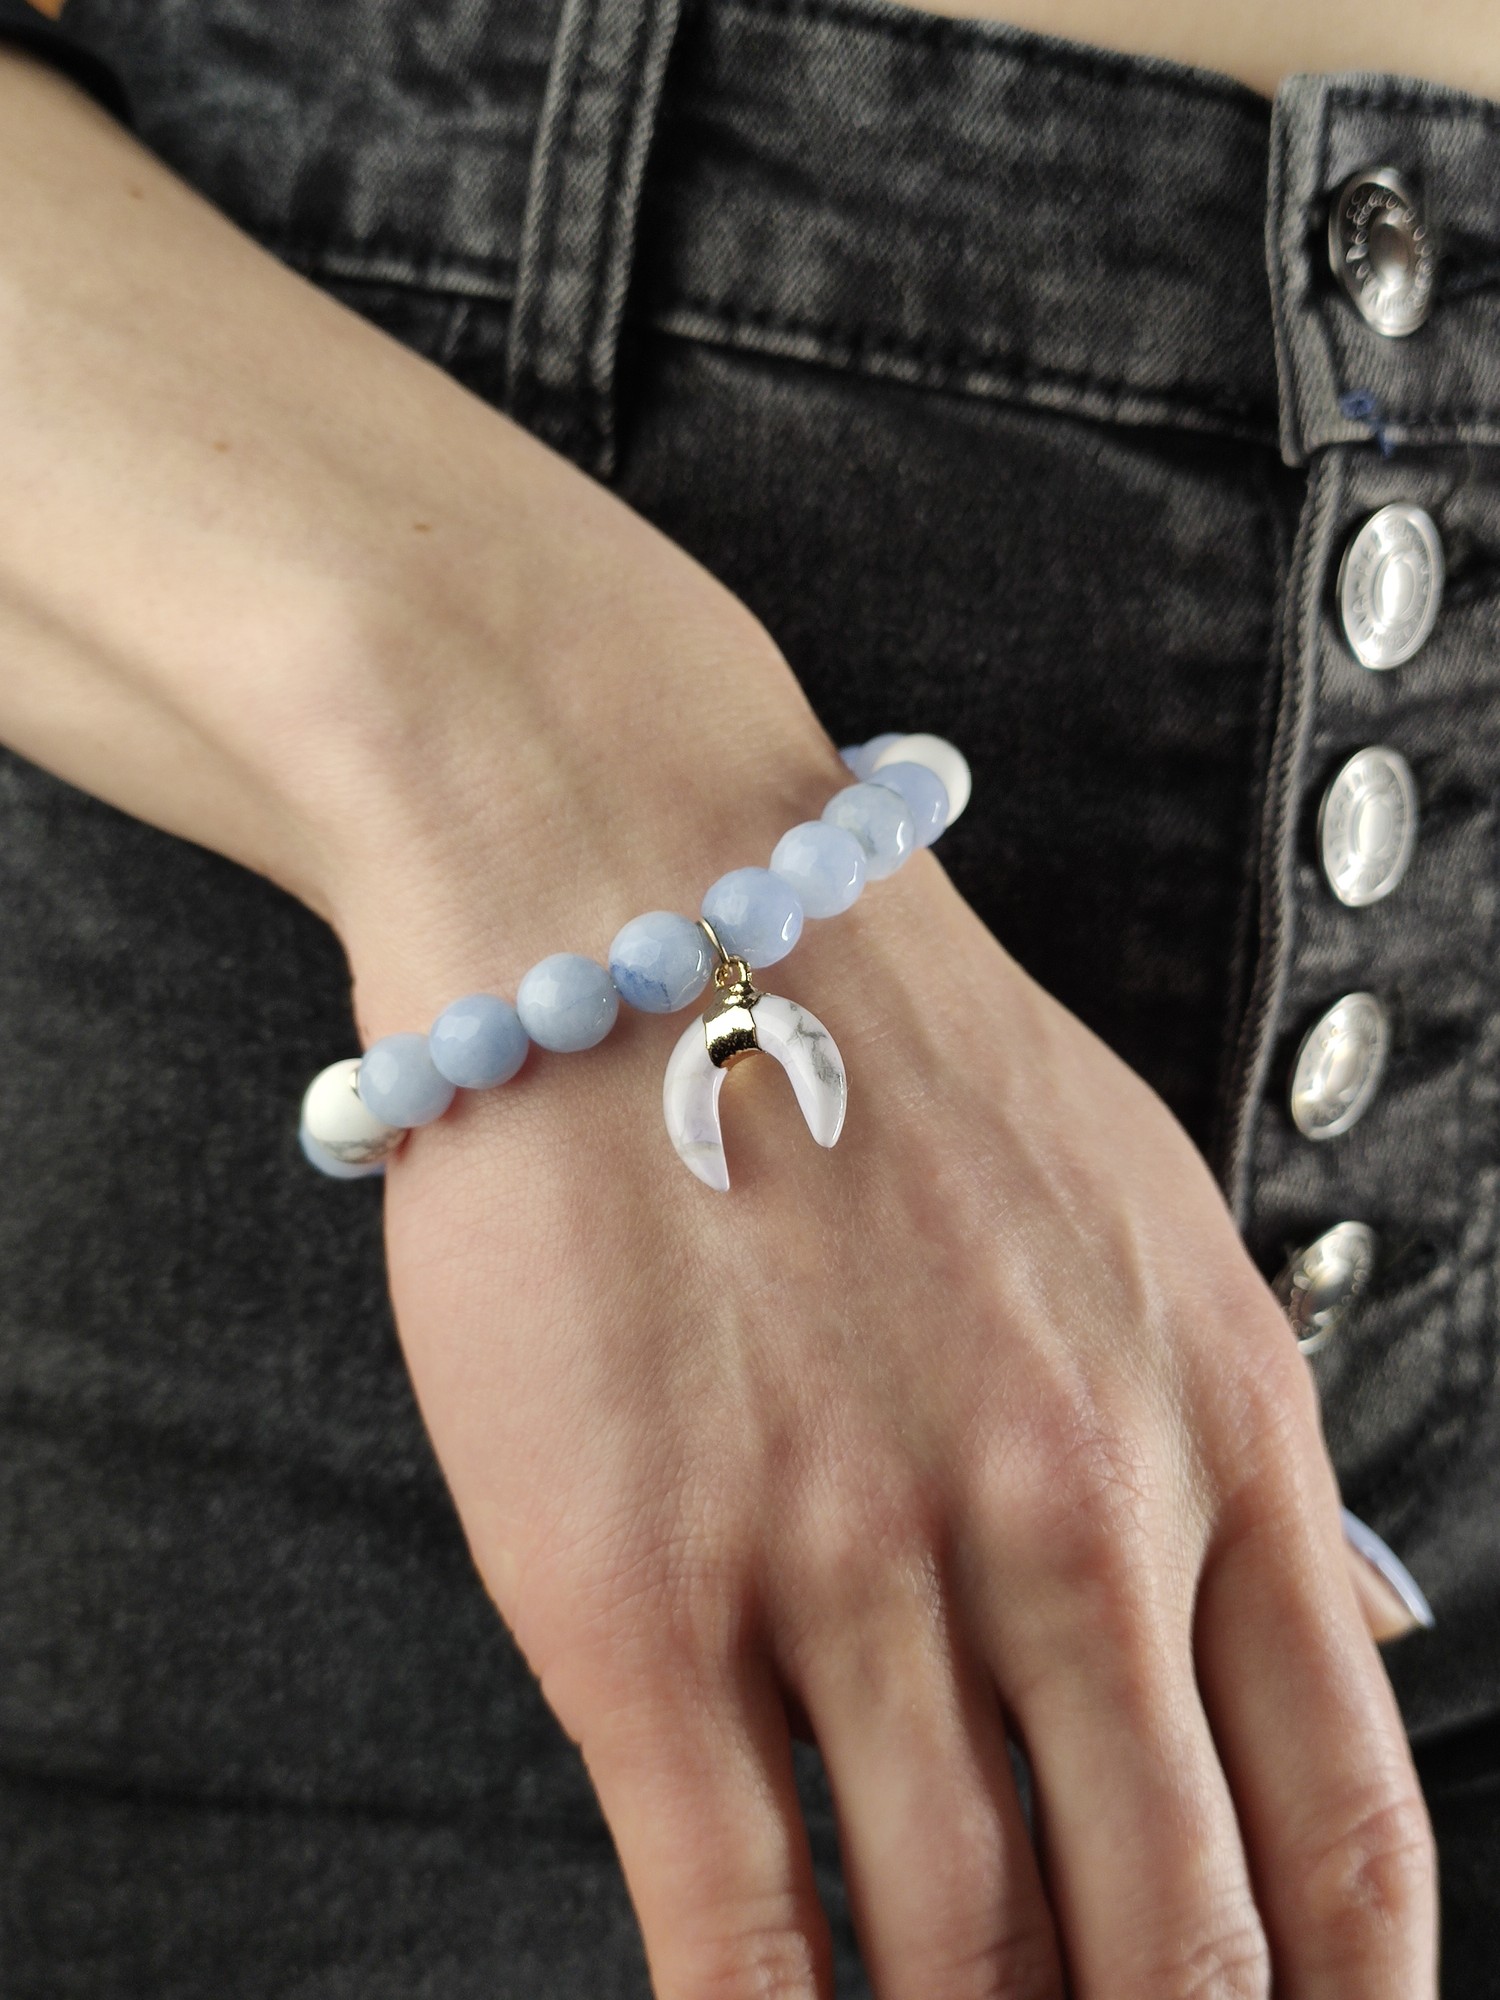 Blue bracelet with natural stones and a pendant